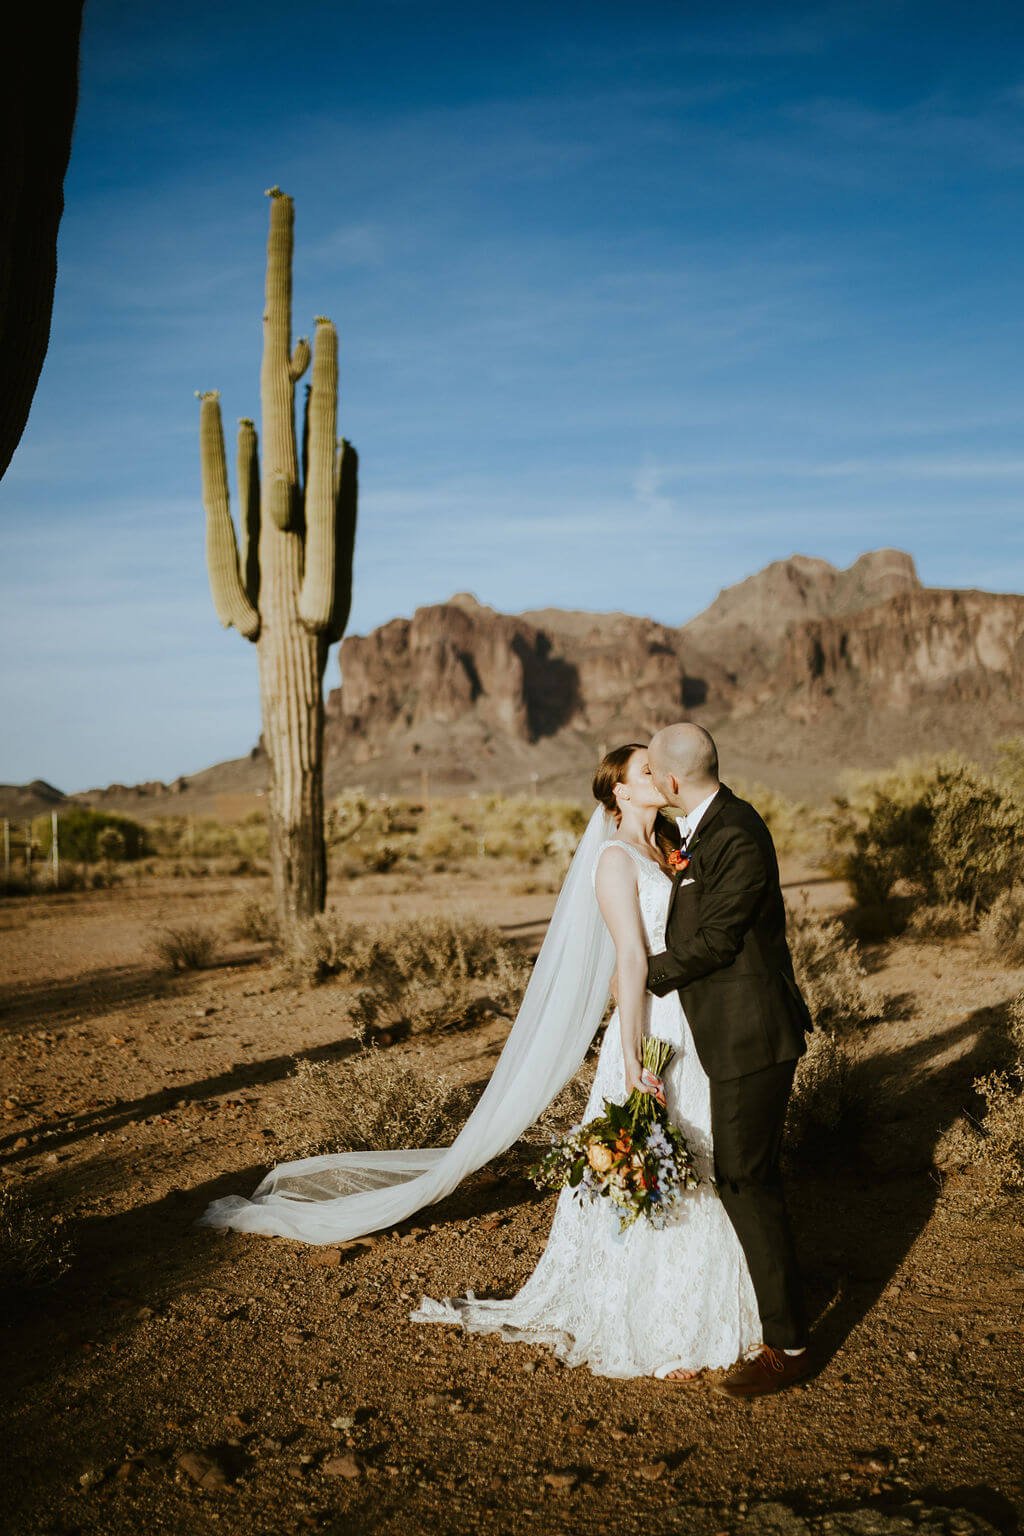 Bride and groom kissing in the desert with cactus in the background